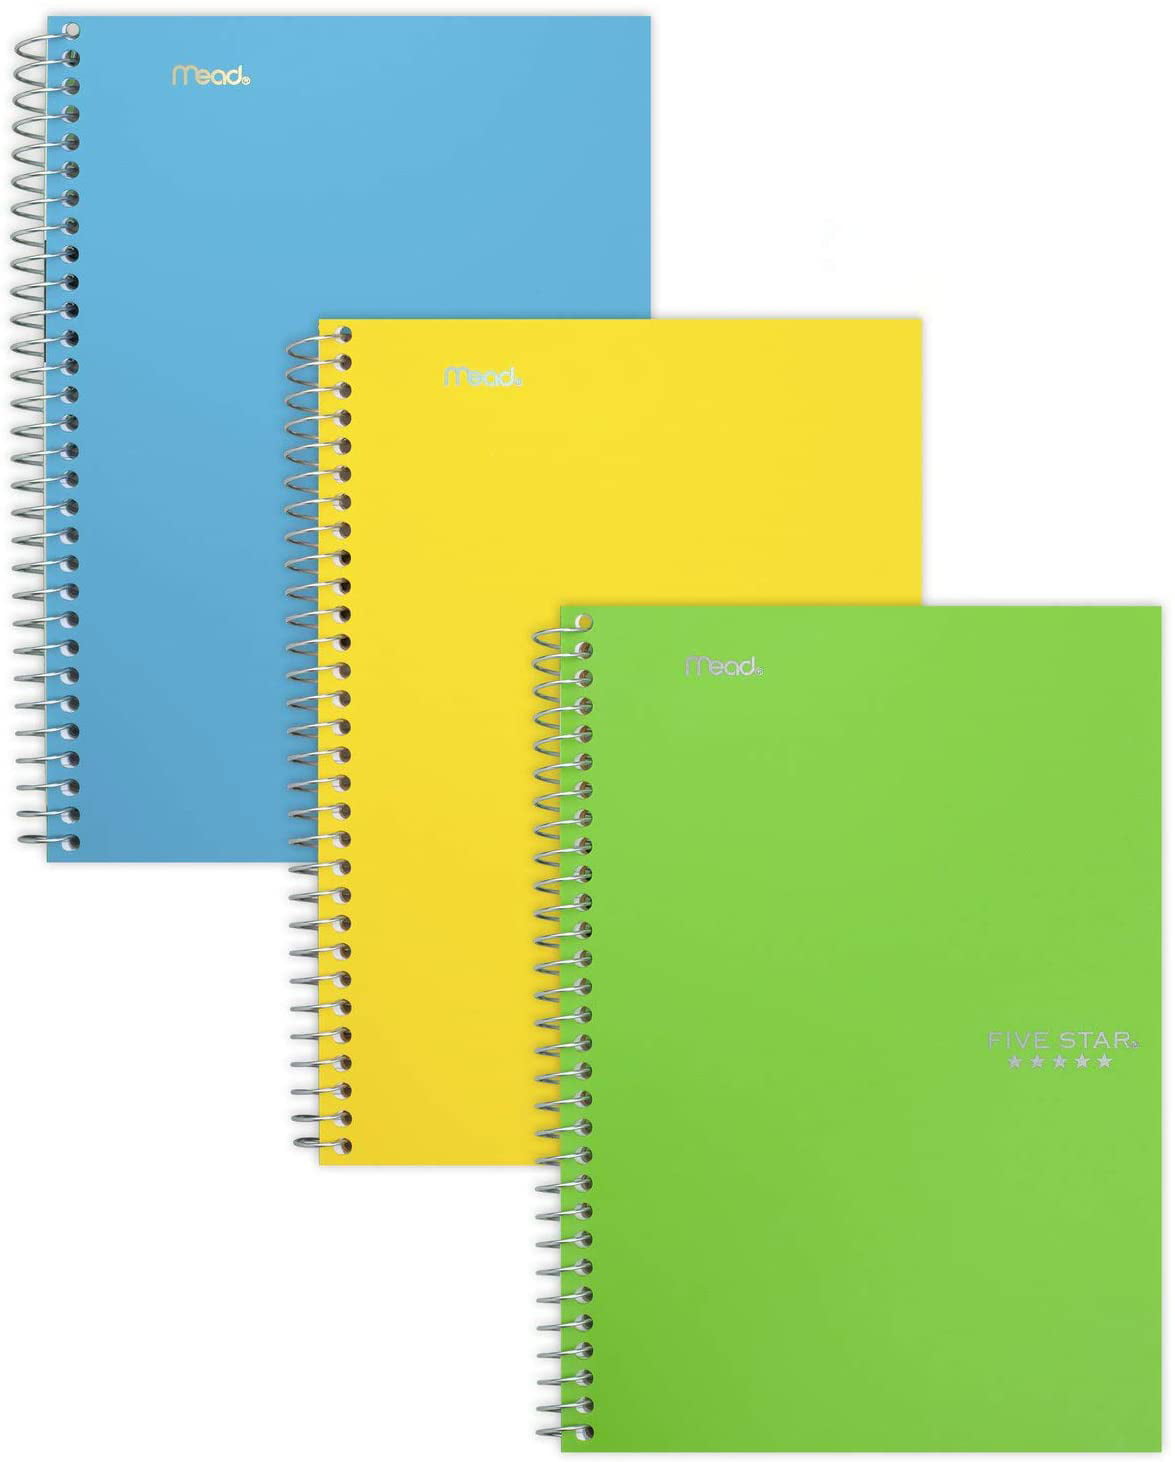 College Ruled Paper Five Star Spiral Notebook Blue 73659 5 Subject 9-1/2 x 6 